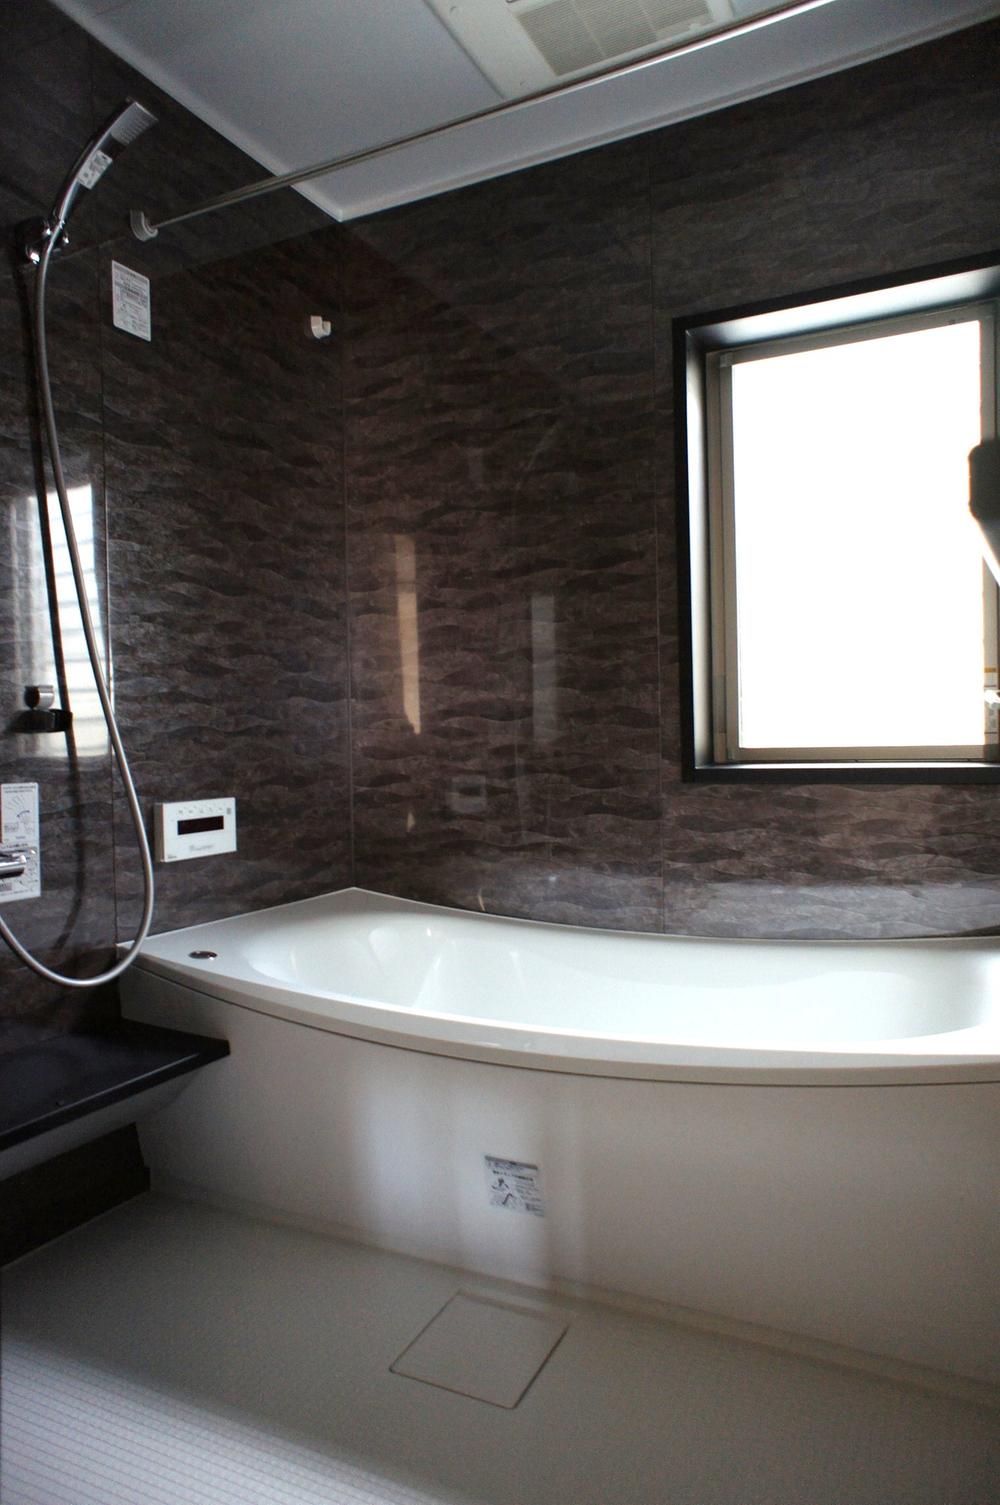 Same specifications photo (bathroom). Since 1 pyeong size you can leisurely bath. 